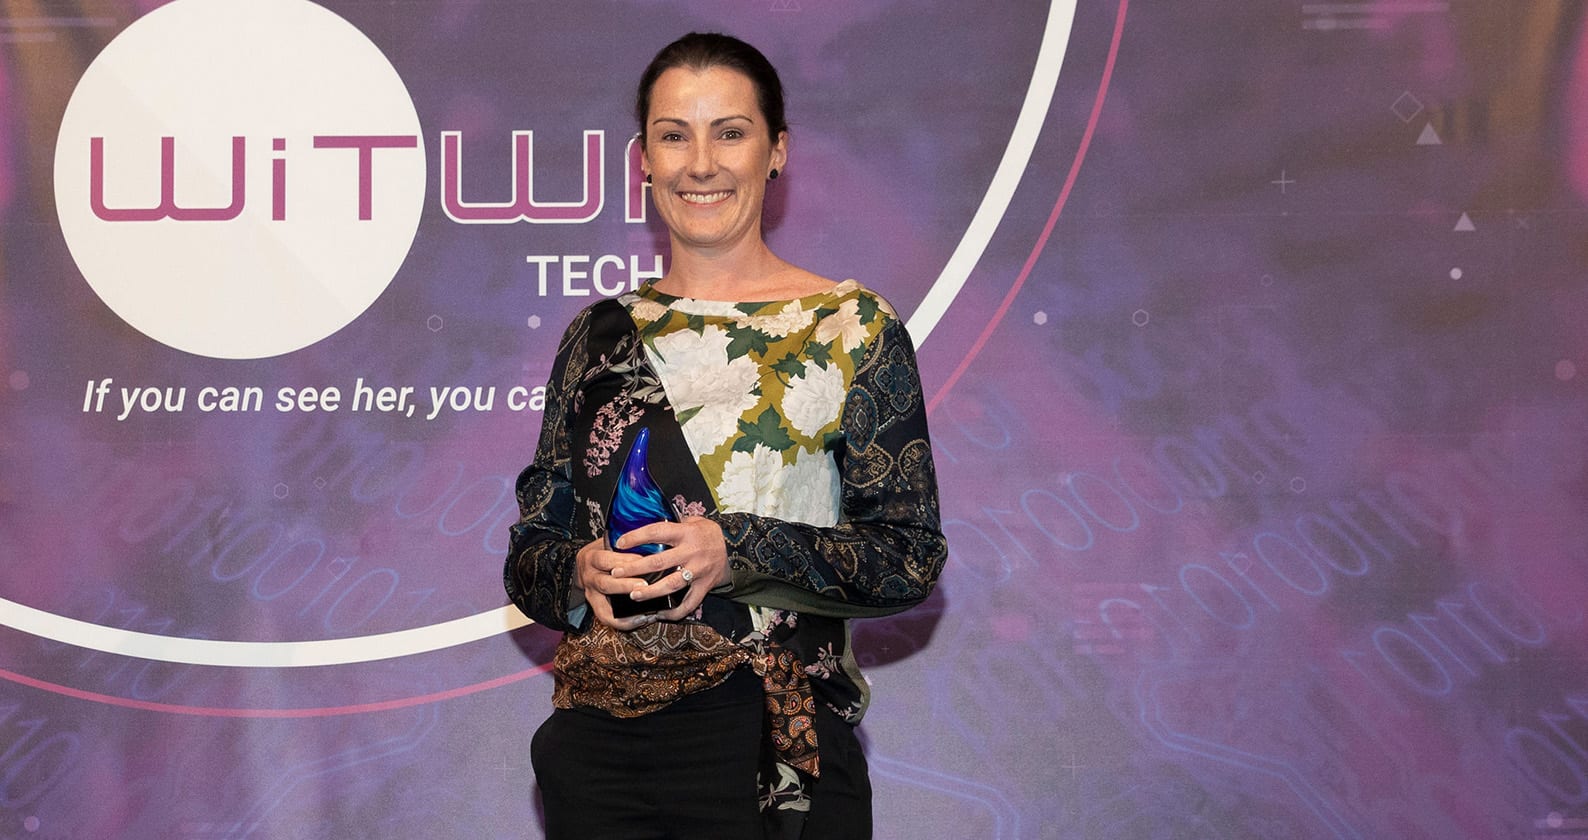 Image for WA data science leader named in State’s top 20 women in technology